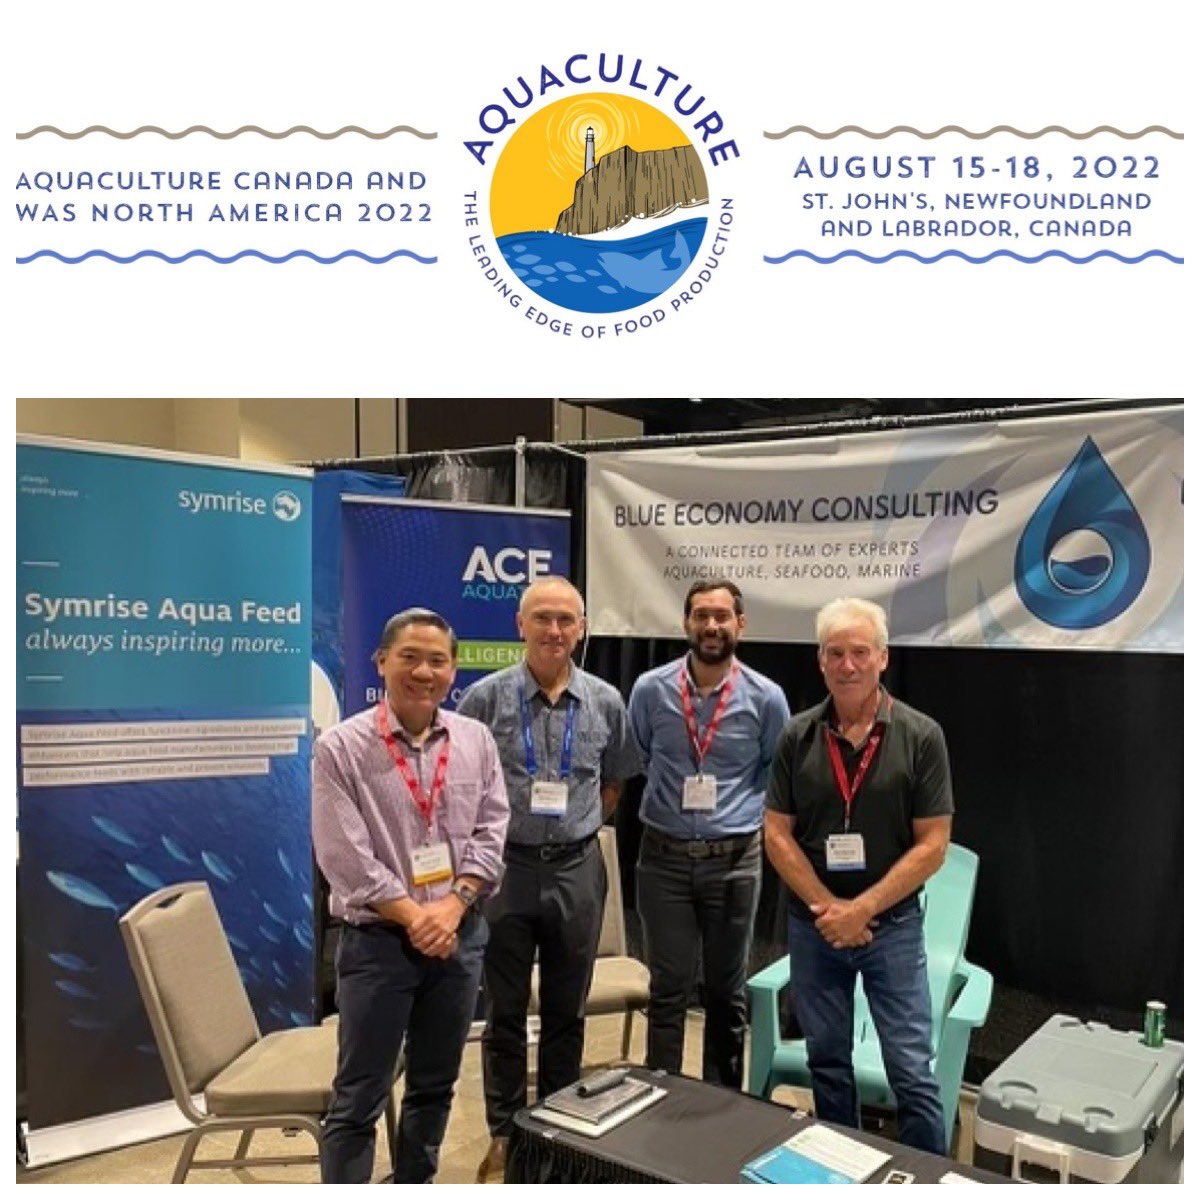 Needing #technicalexpertise, #marketingstrategies or #businessdevelopment assistance? Swing by our booth. We’d be glad to talk with you. #aquaculture